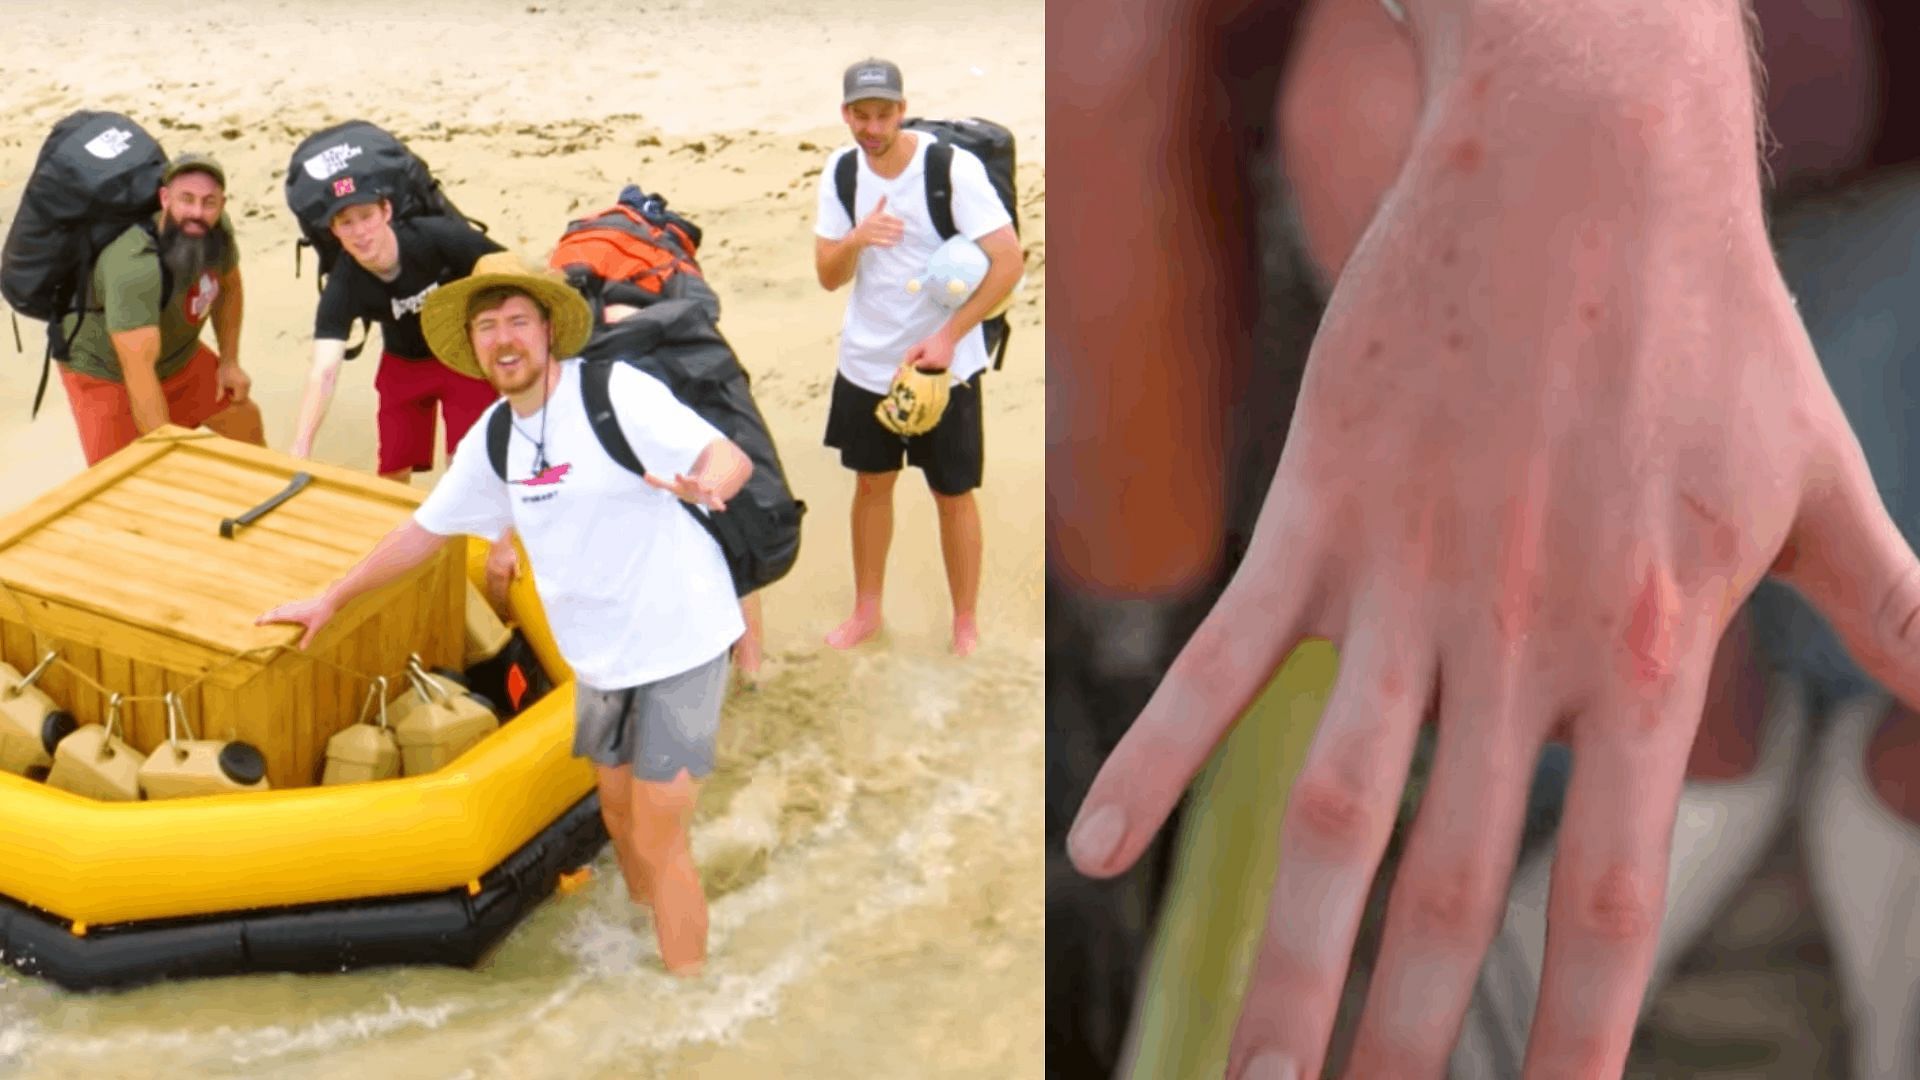 MrBeast was afflicted by bug bites and sunburn in his latest video (Image via MrBeast/YouTube)